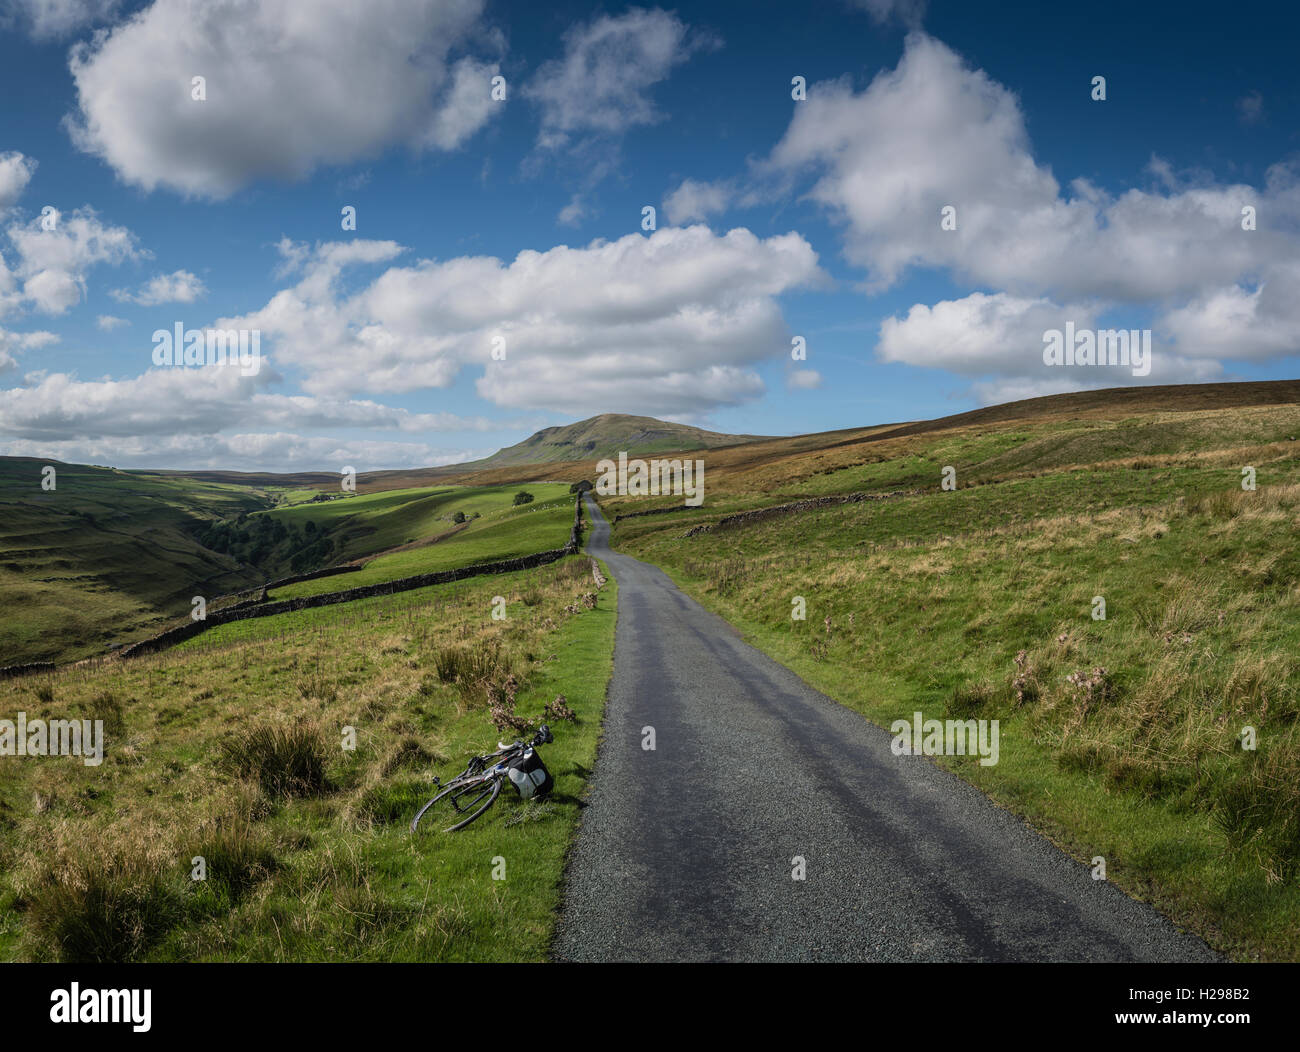 The landscape associated with the Halton Gill Road, Yorkshire Dales, UK. Stock Photo